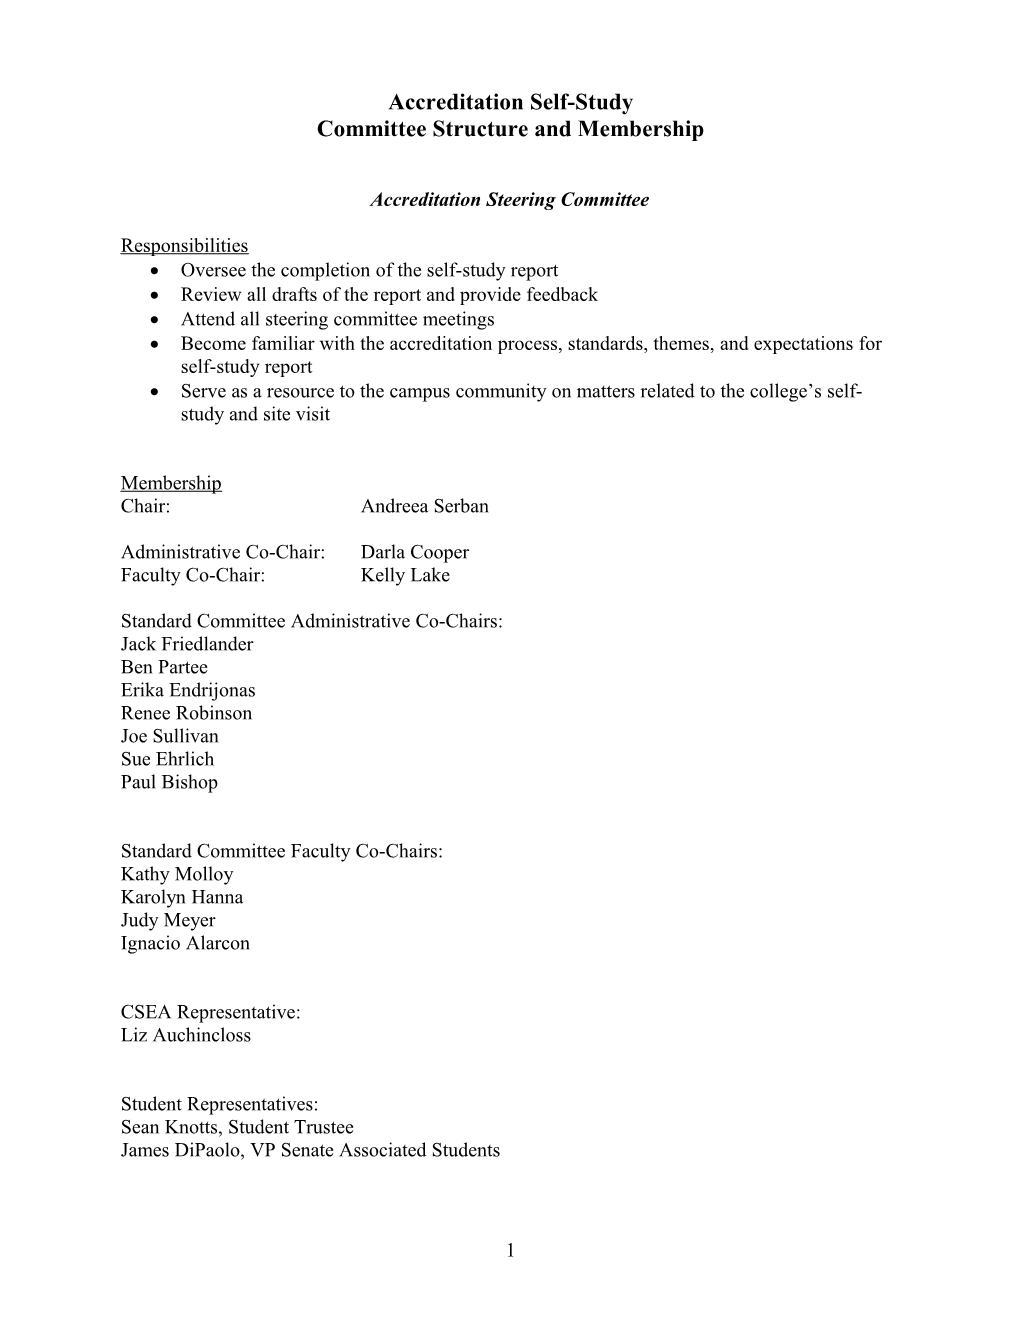 Accreditation Steering Committee